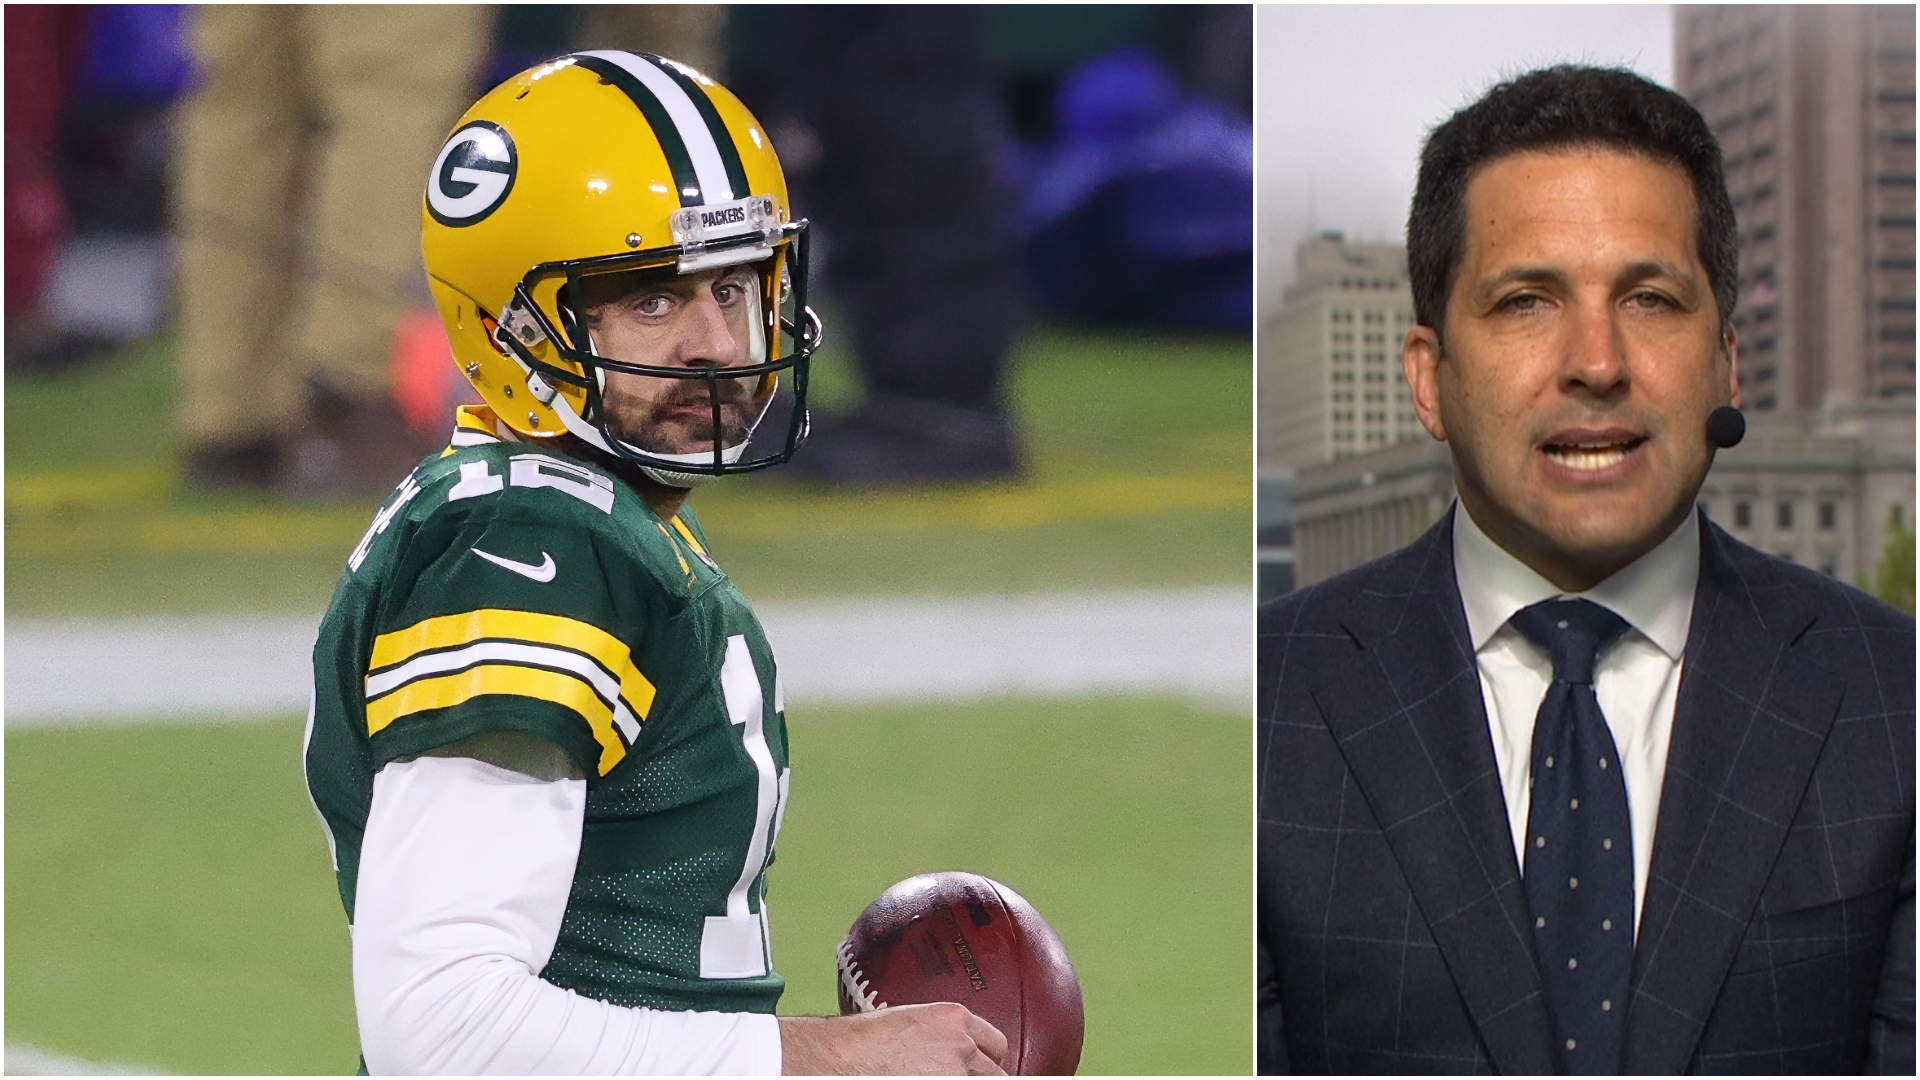 Schefter: This is about way more than a contract for Rodgers